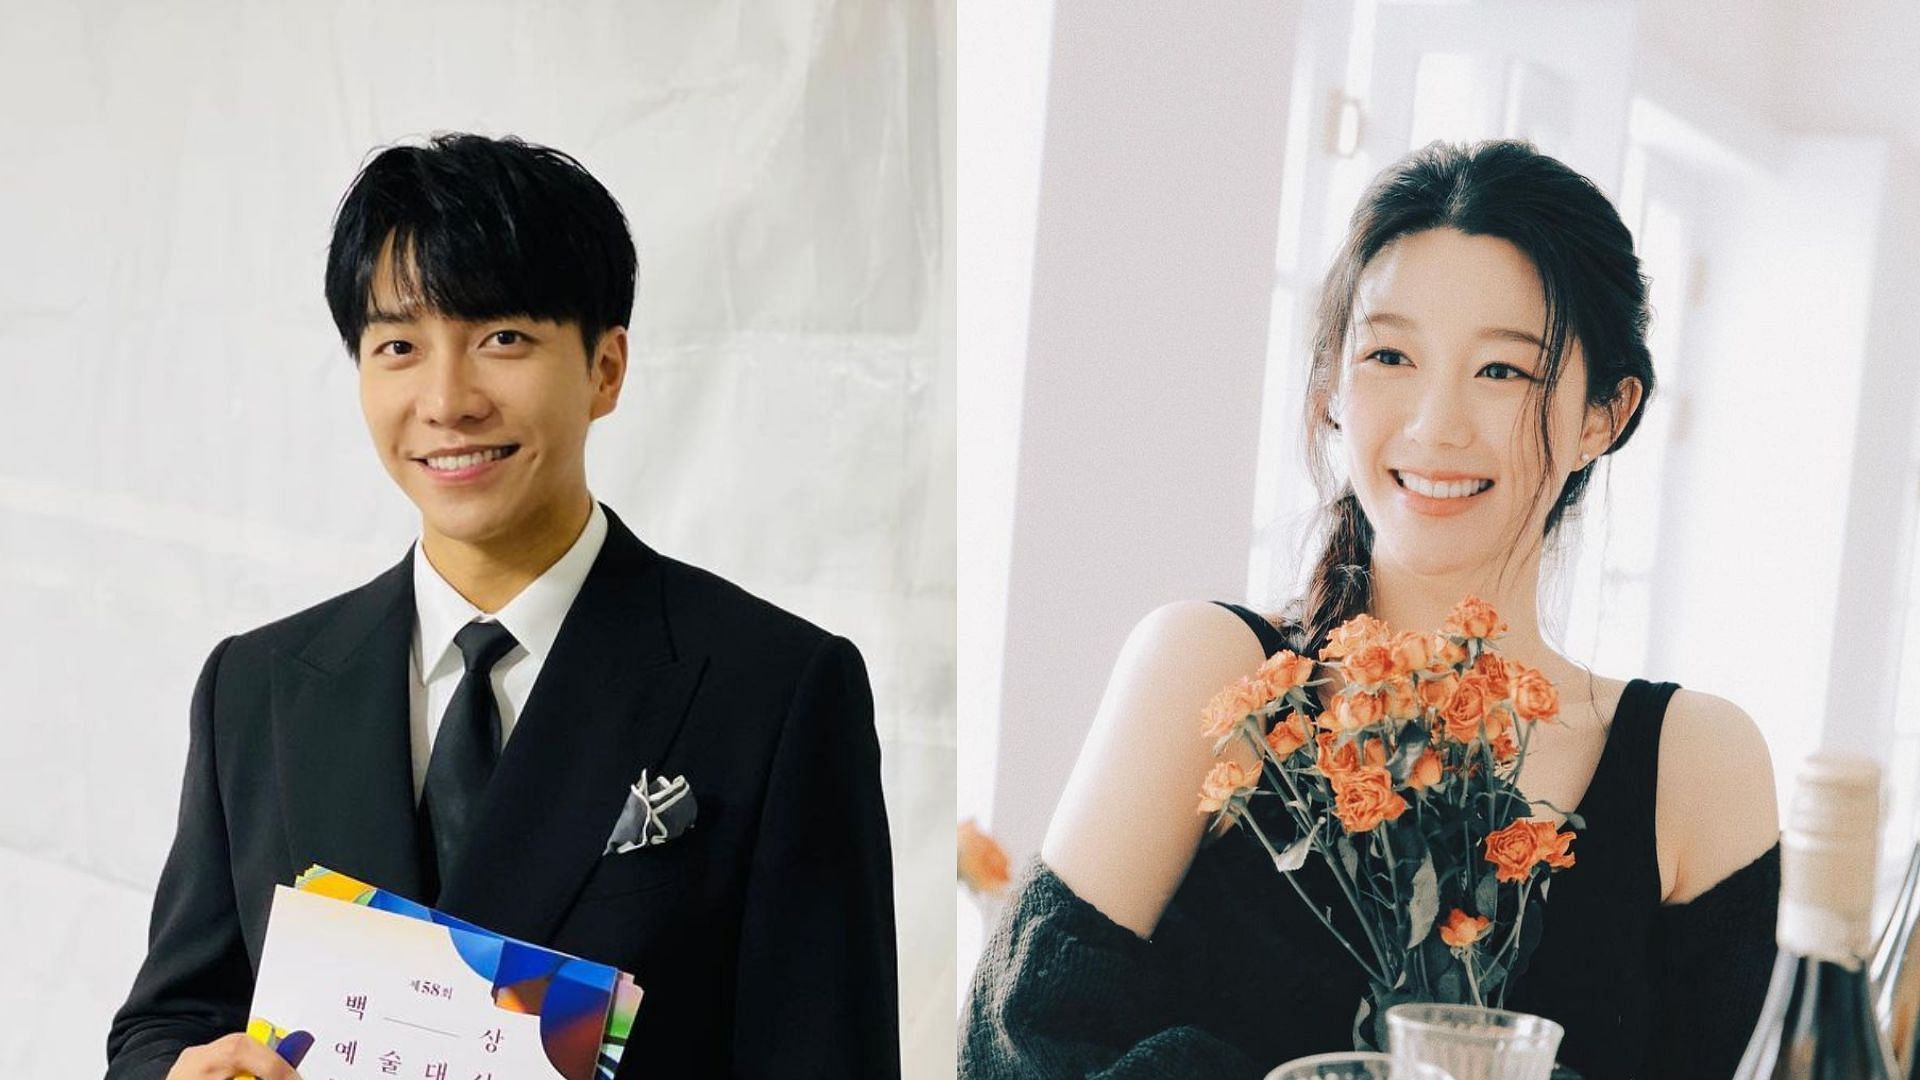 Lee Seung-gi announces marriage plans with Lee Da-in (Images via Instagram/leeseunggi.official and xx__dain)